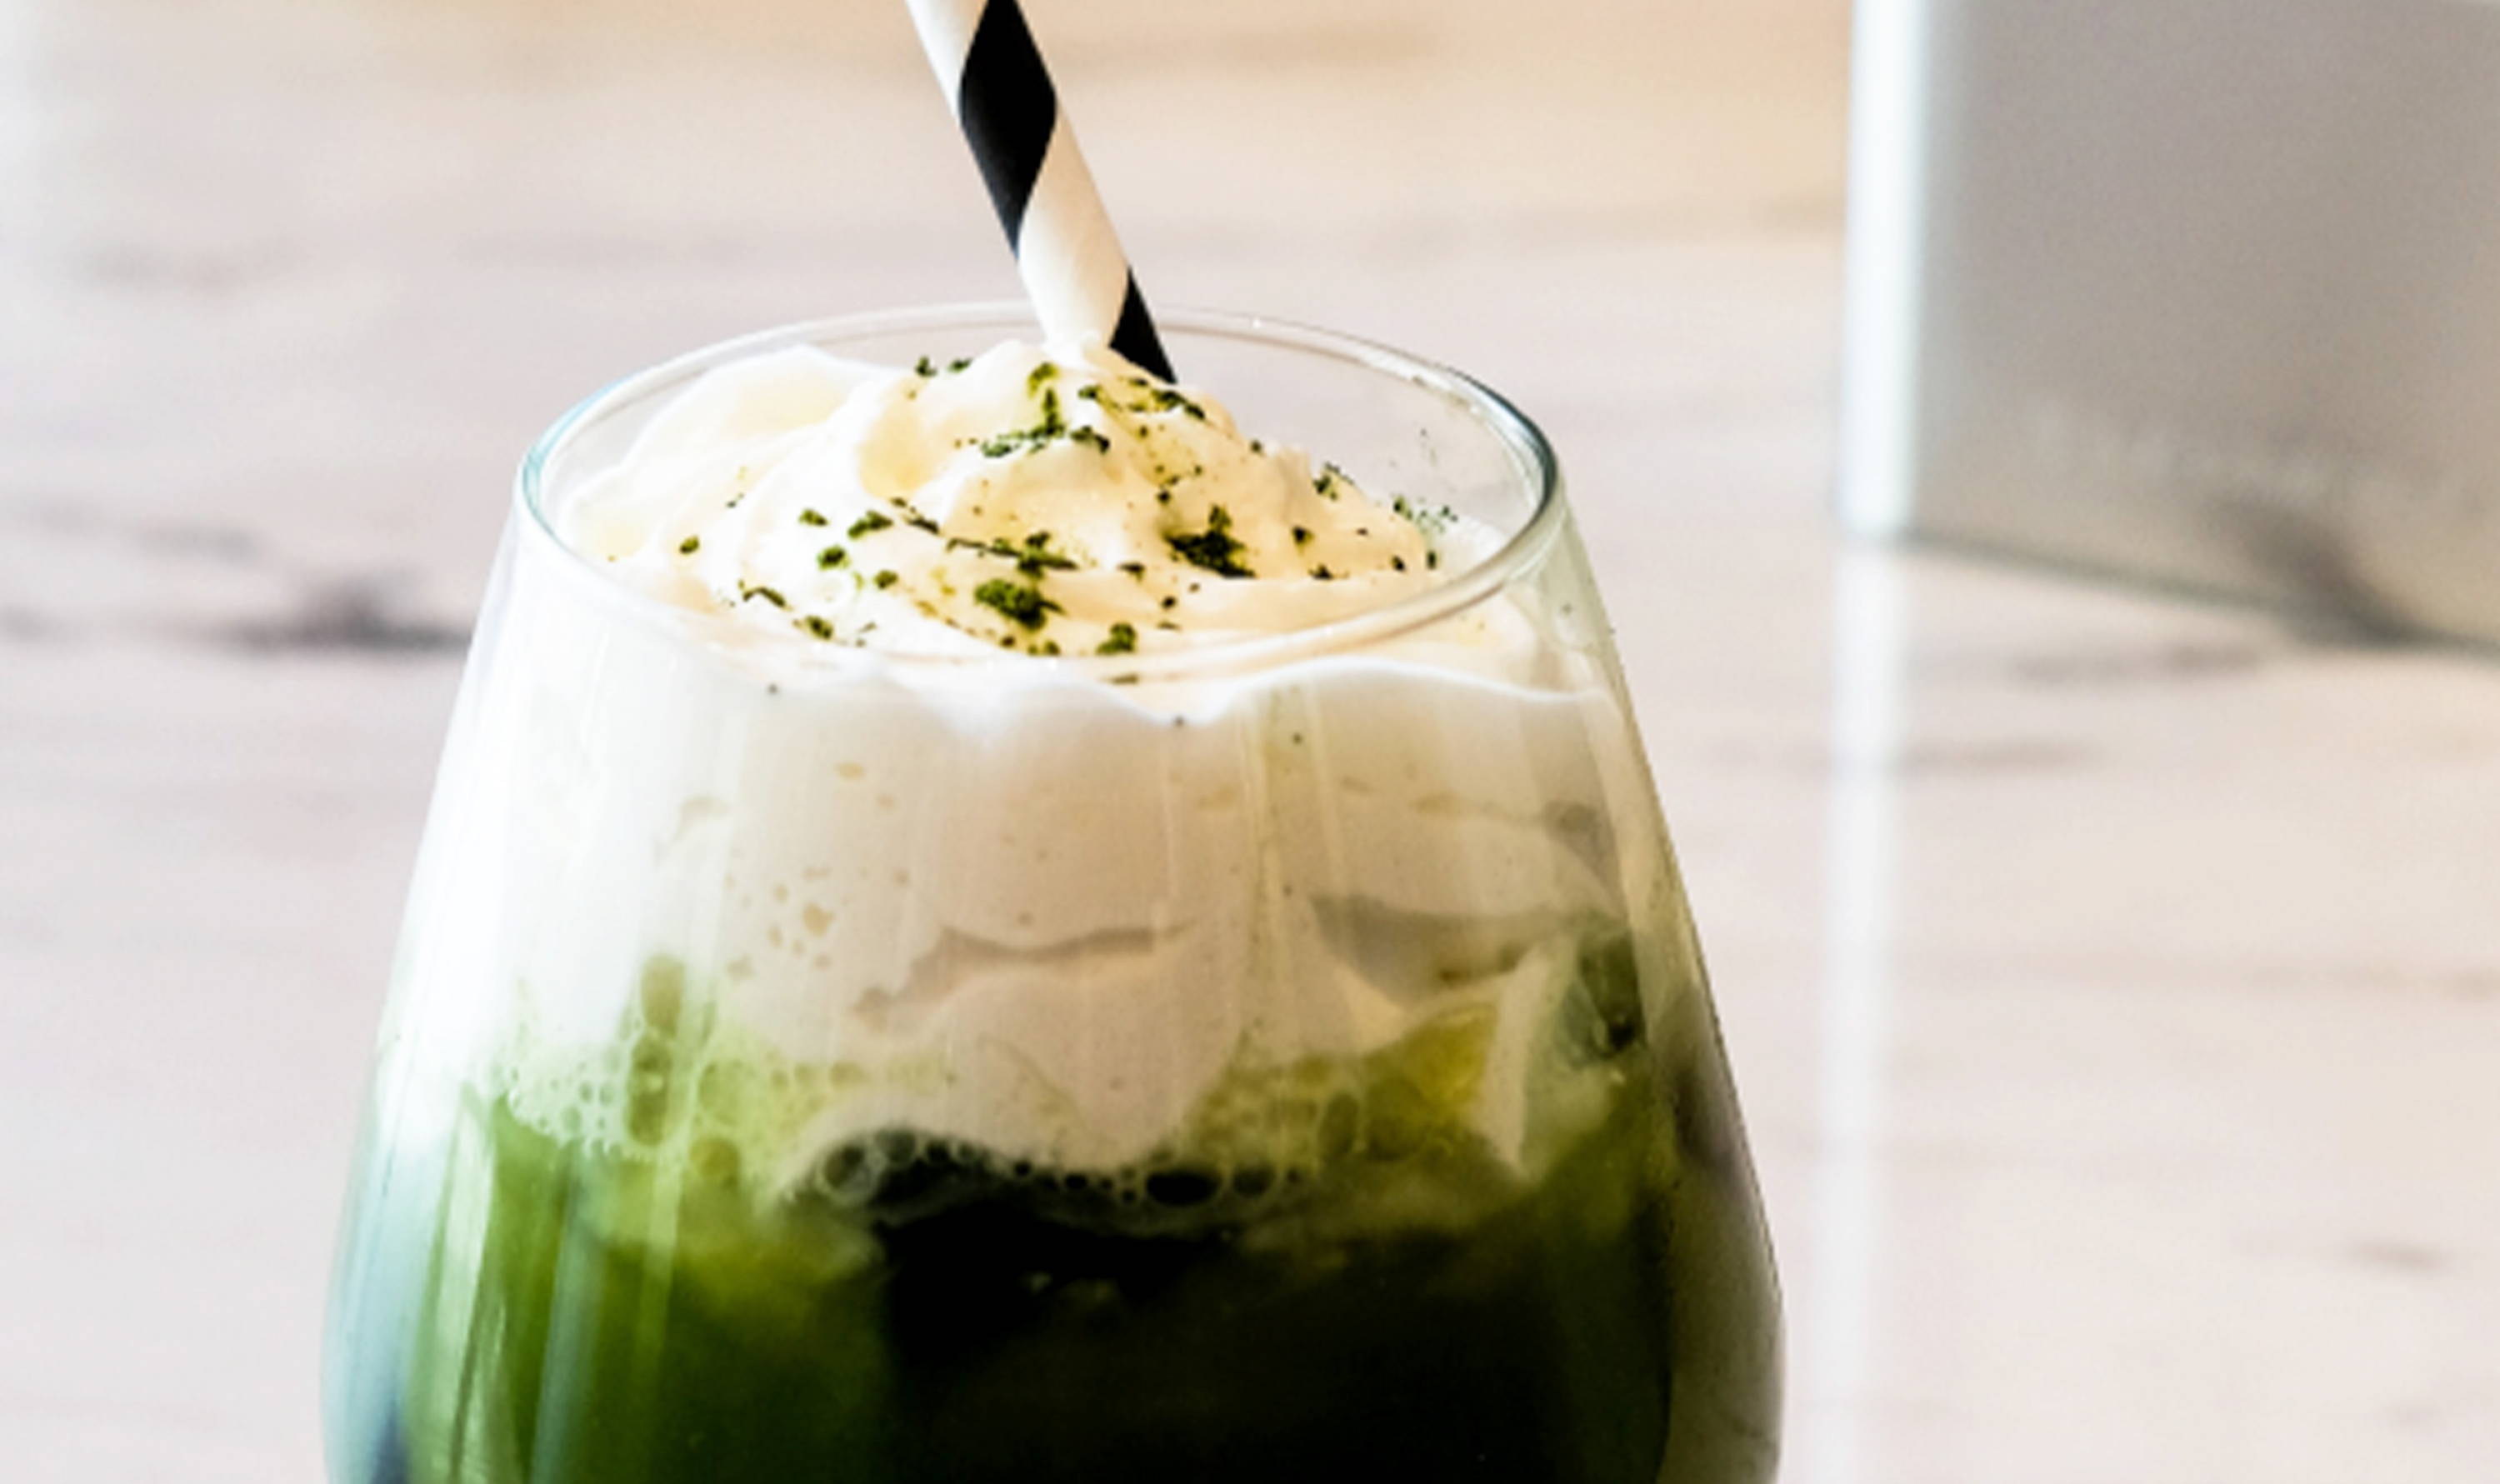 matcha dessert in a glass made with tealeaves tencha matcha